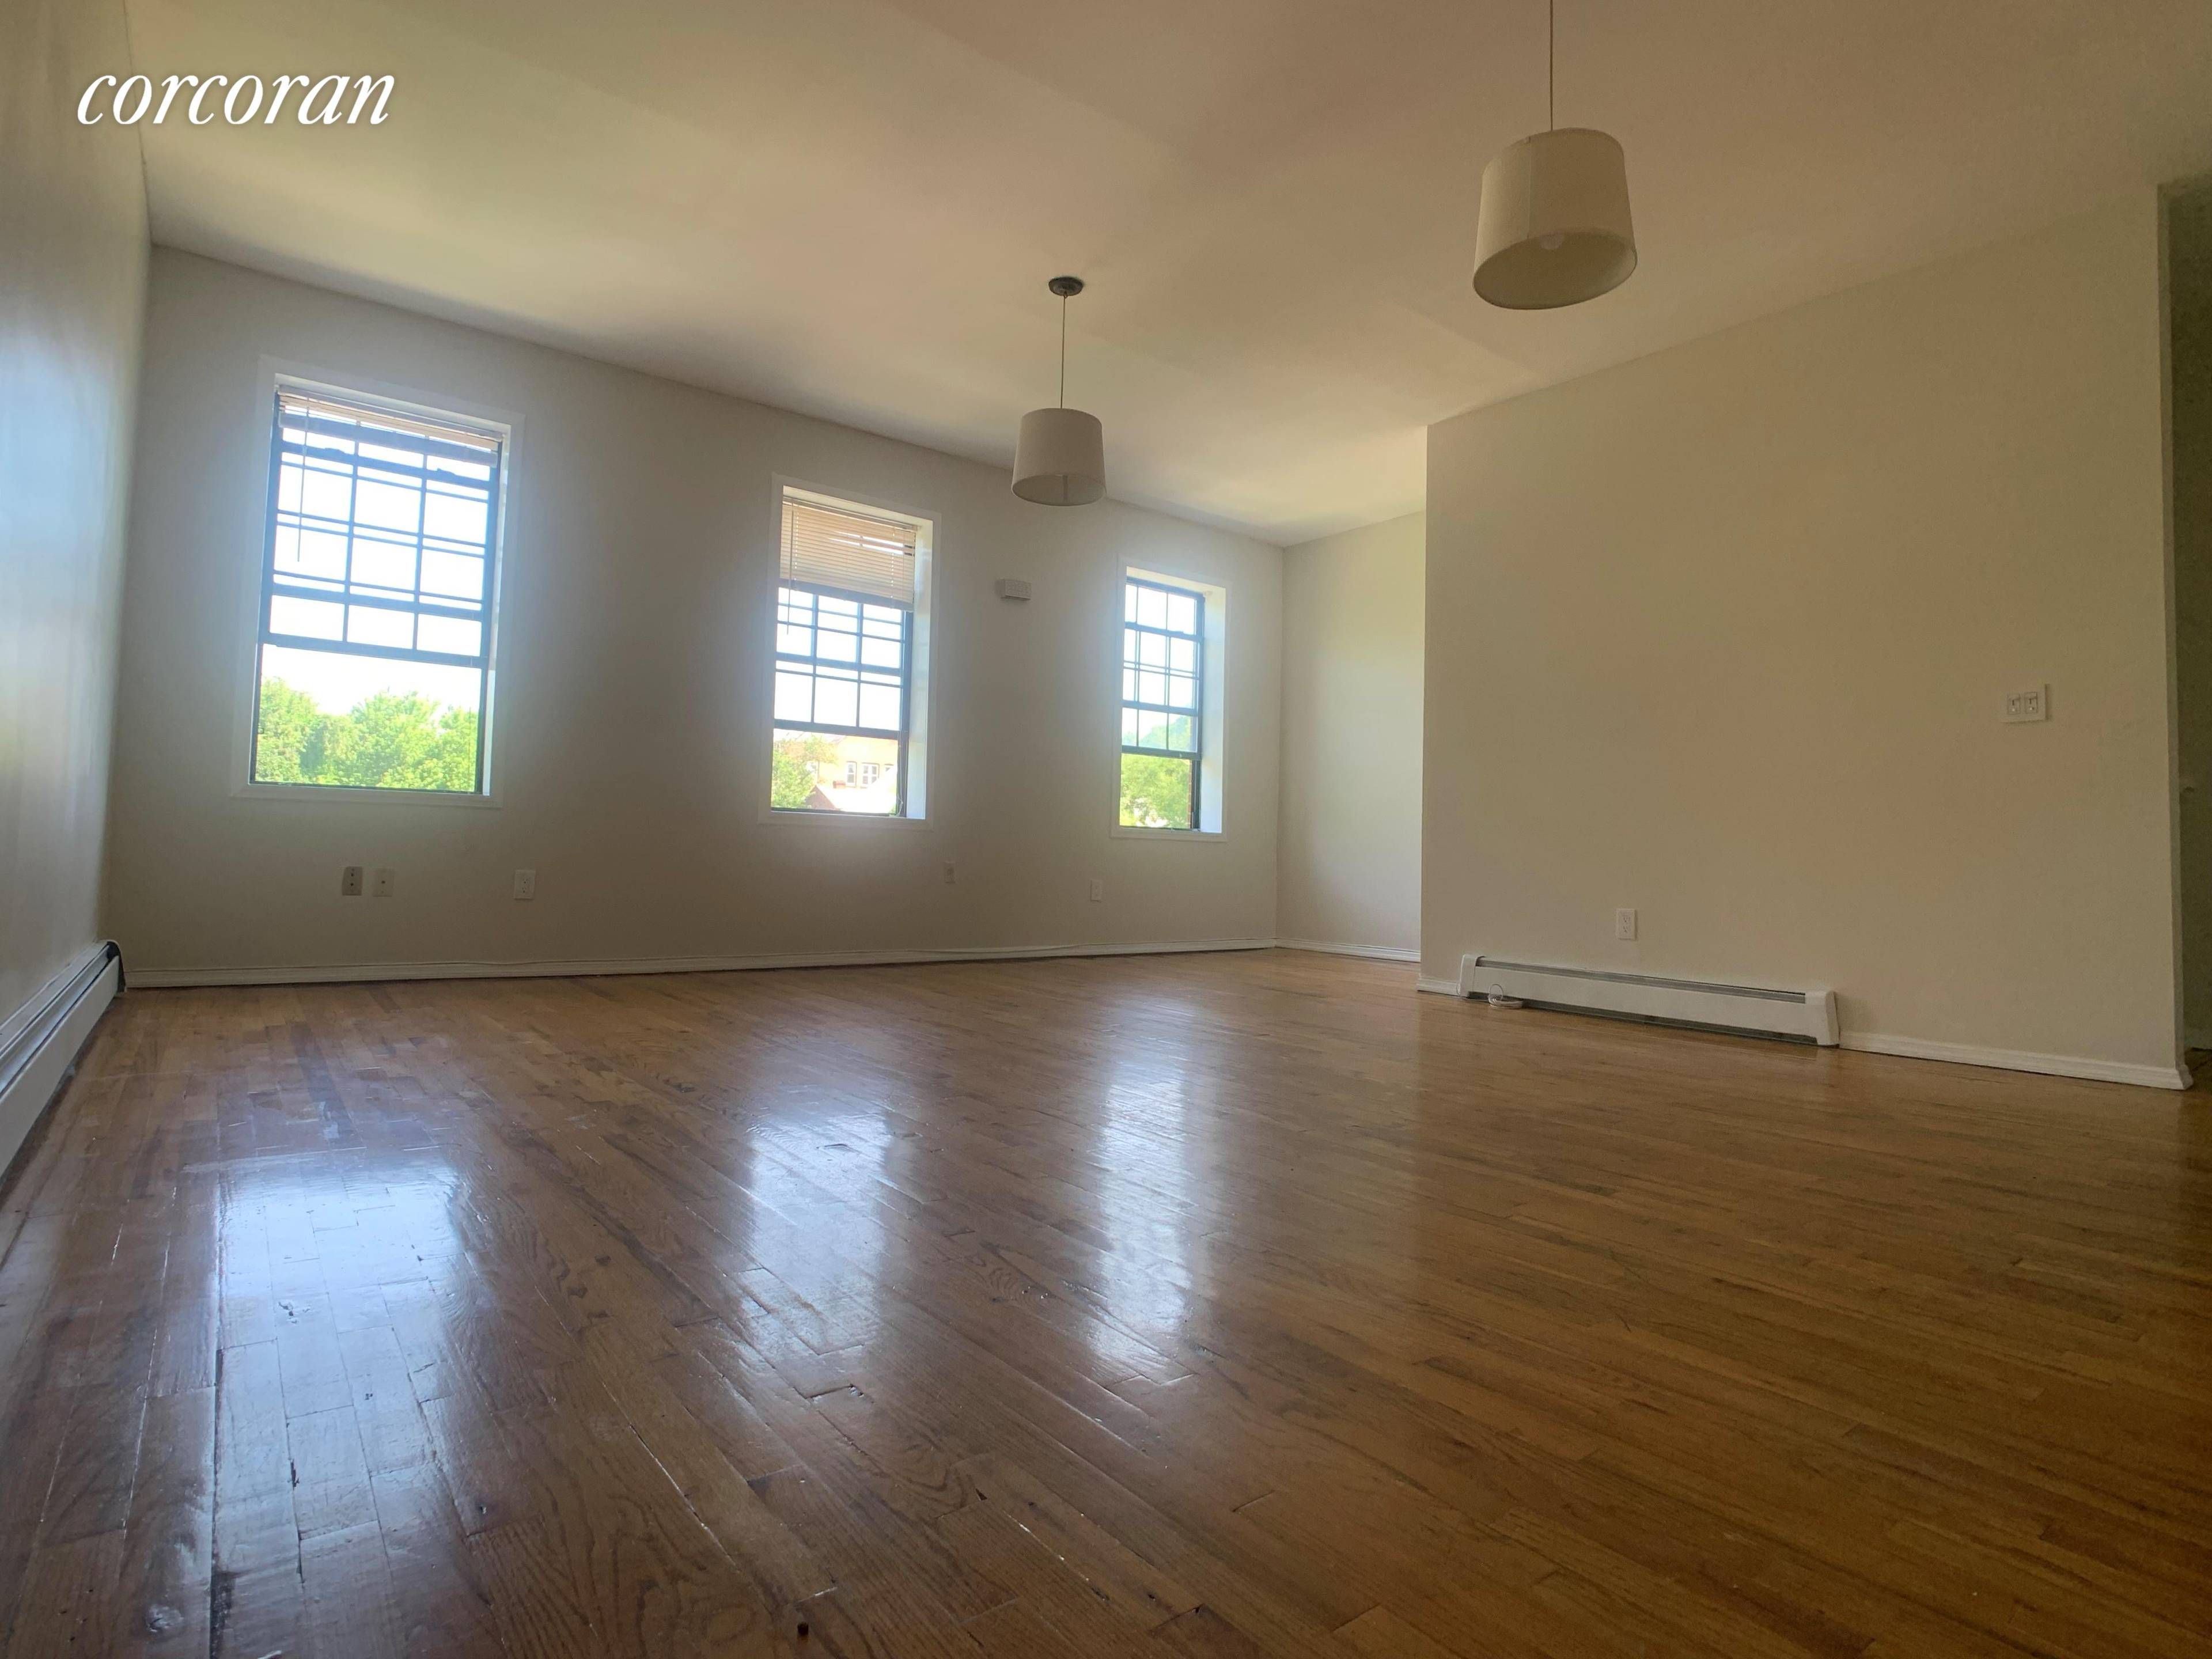 Large and bright 3 bedroom 2 bathroom unit located on a lovely tree lined block on the Clinton Hill Bed Stuy border.